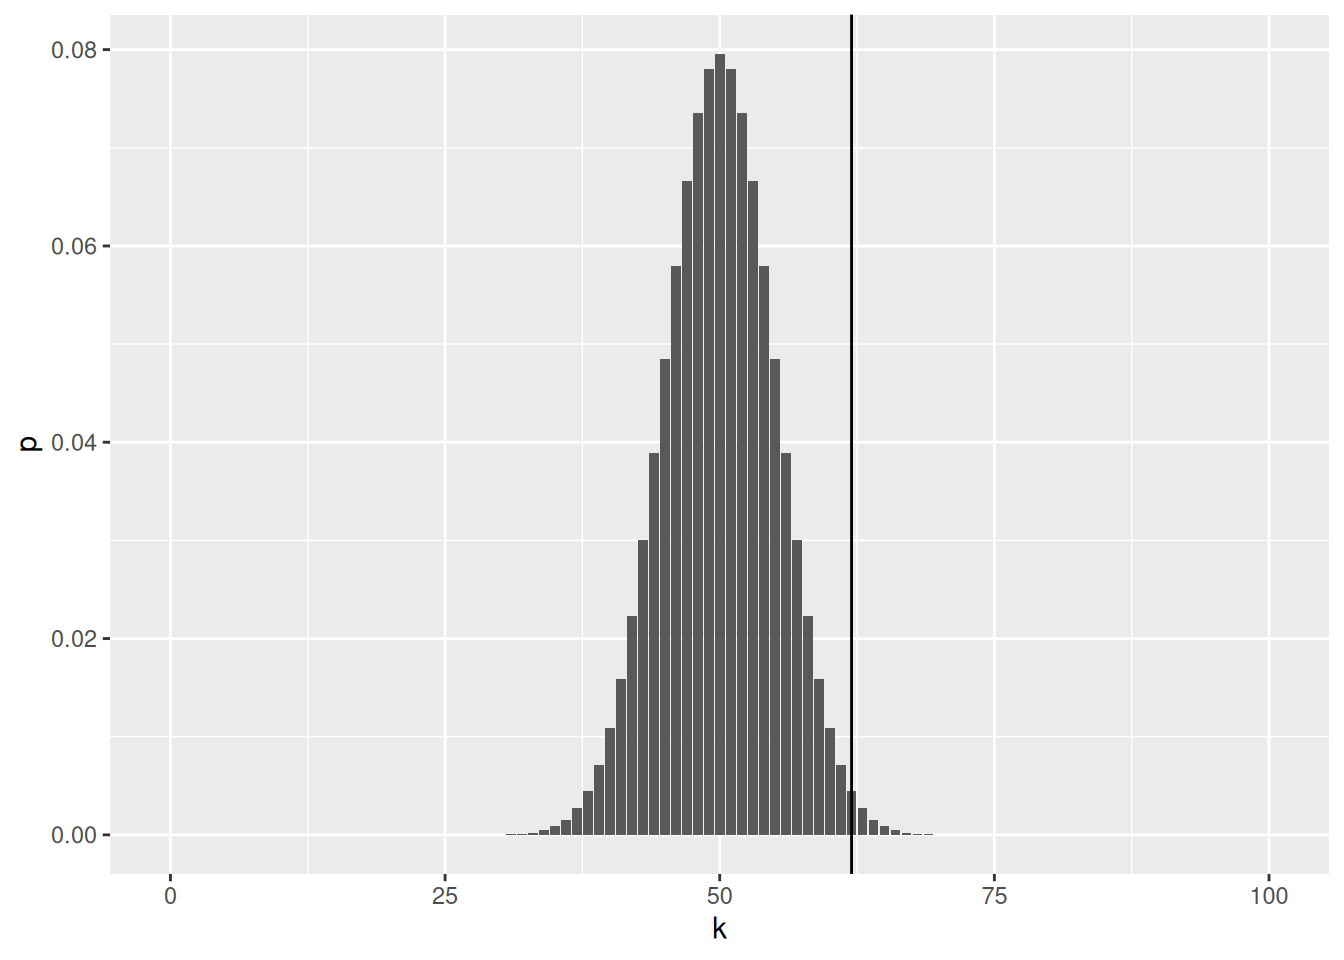 Binomial density of an unbiased coin to get 0 to 100 heads. The full area of the histogram sums to 1.